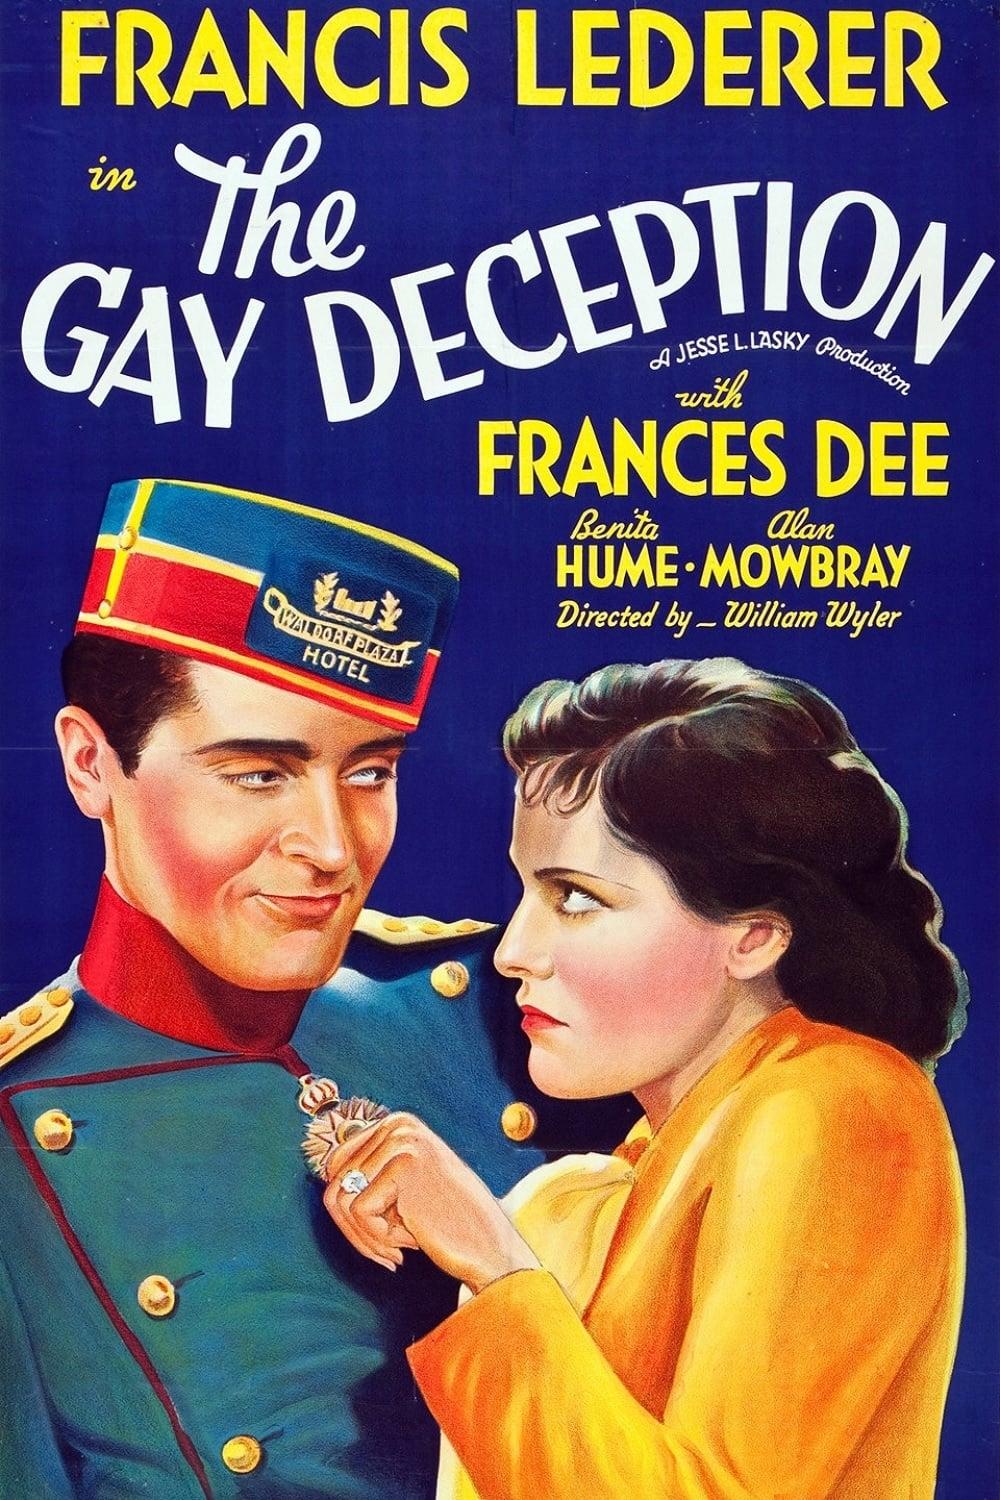 The Gay Deception poster